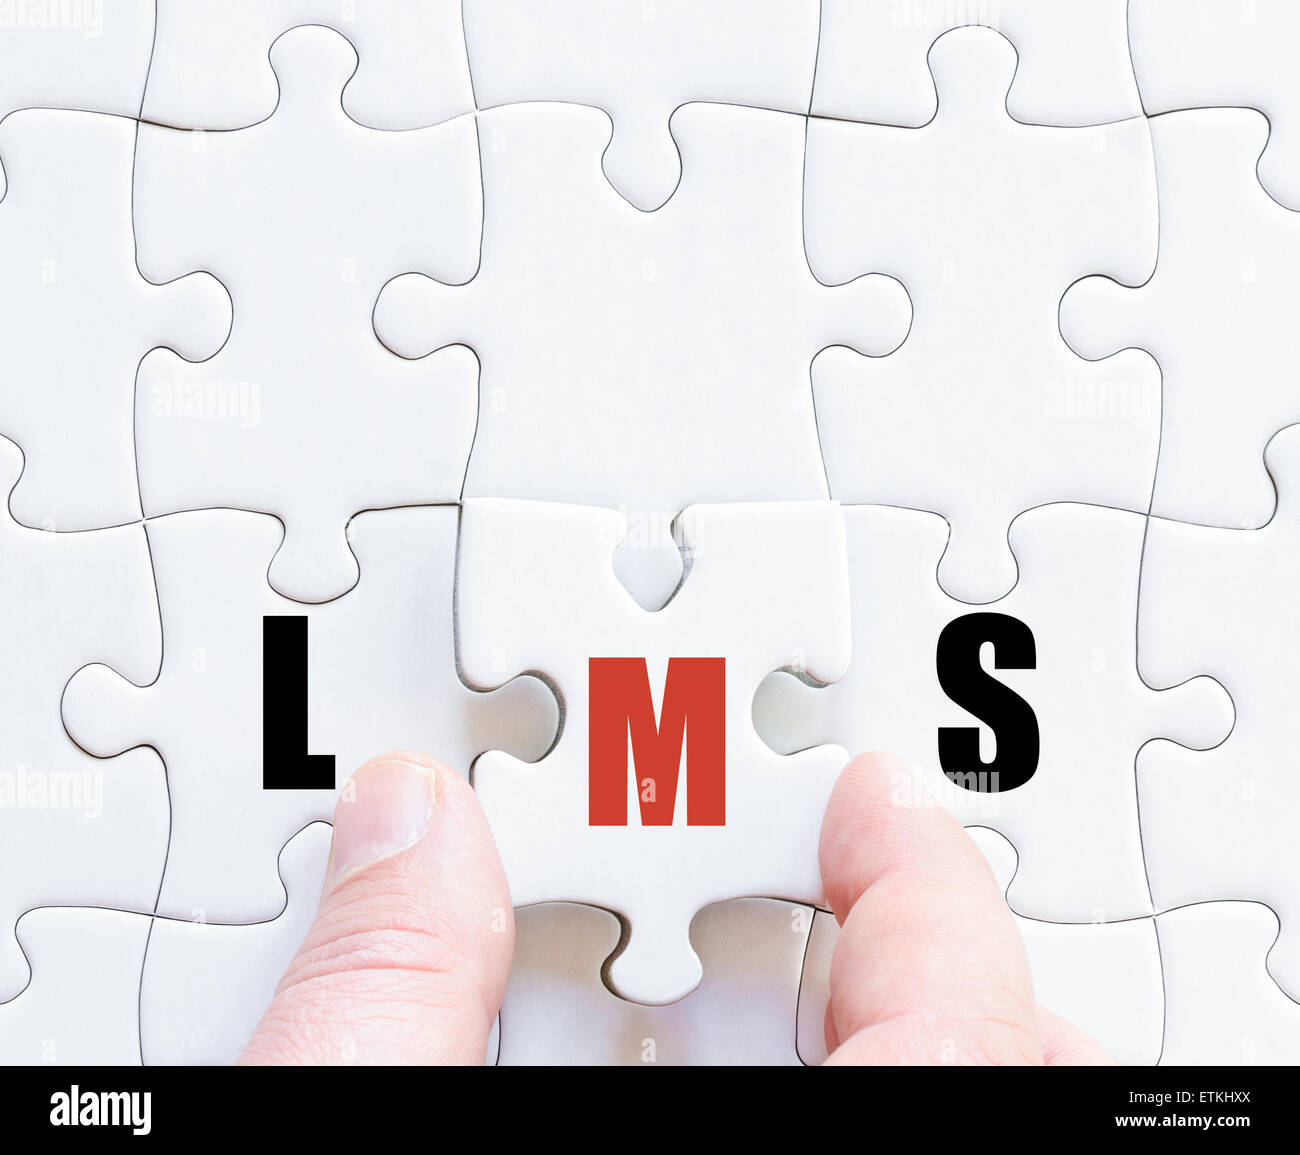 Hand of a business man completing the puzzle with the last missing piece.Concept image of Business Acronym LMS as Learning Management System Stock Photo